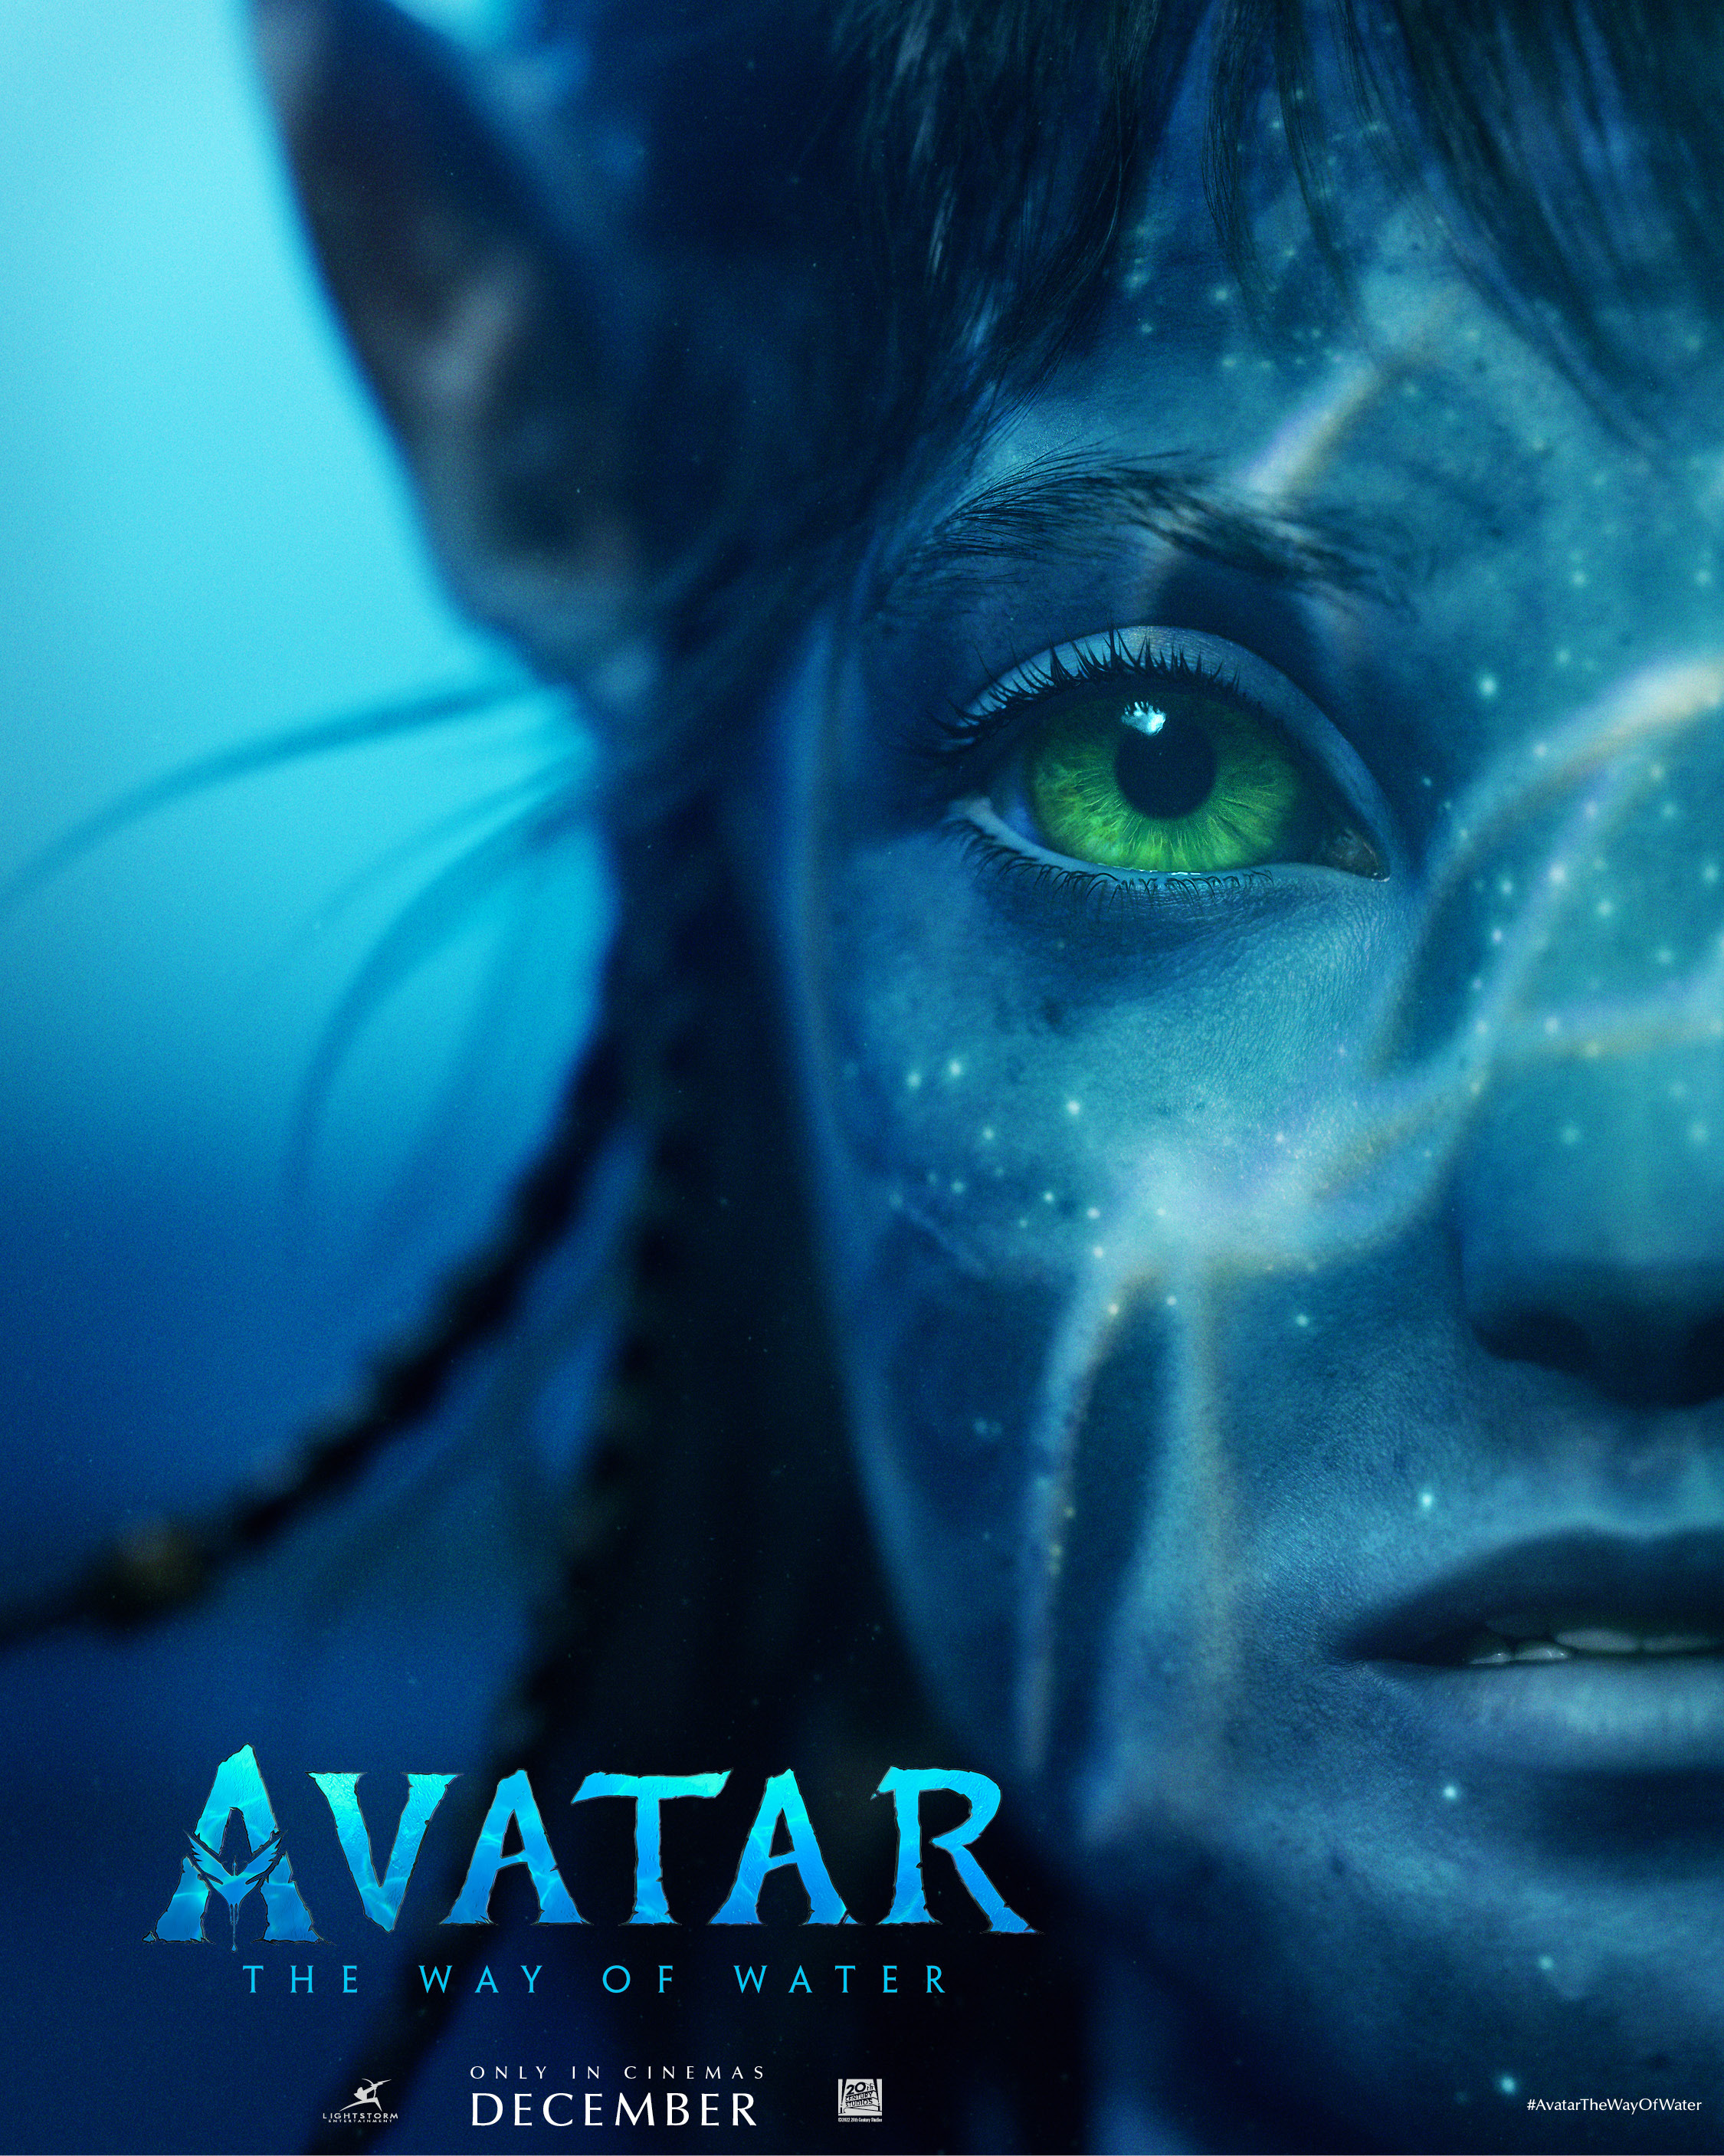 Avatar The Way of Water 2022 Official Hindi Teaser Trailer 1080p HDRip Download